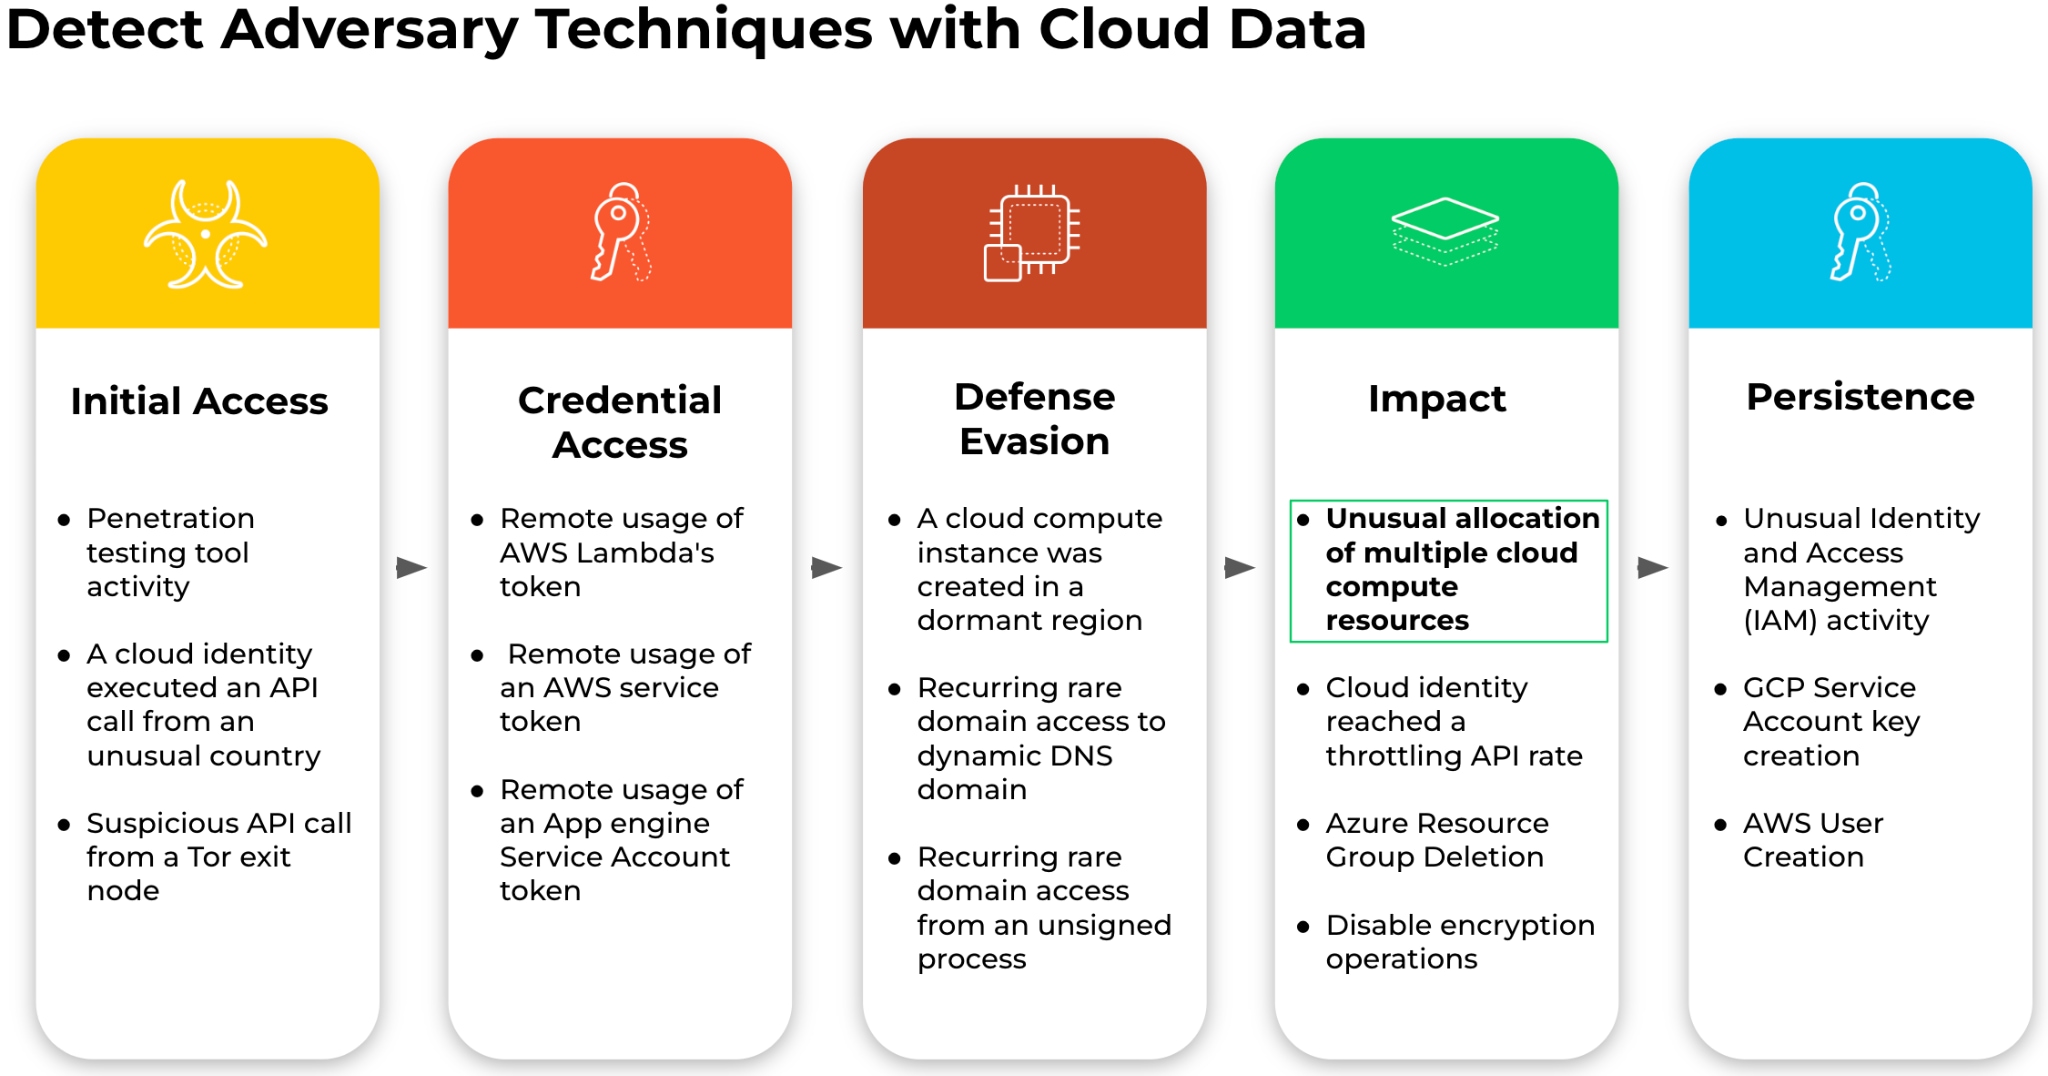 Image 1: Detecting adversary techniques with cloud data